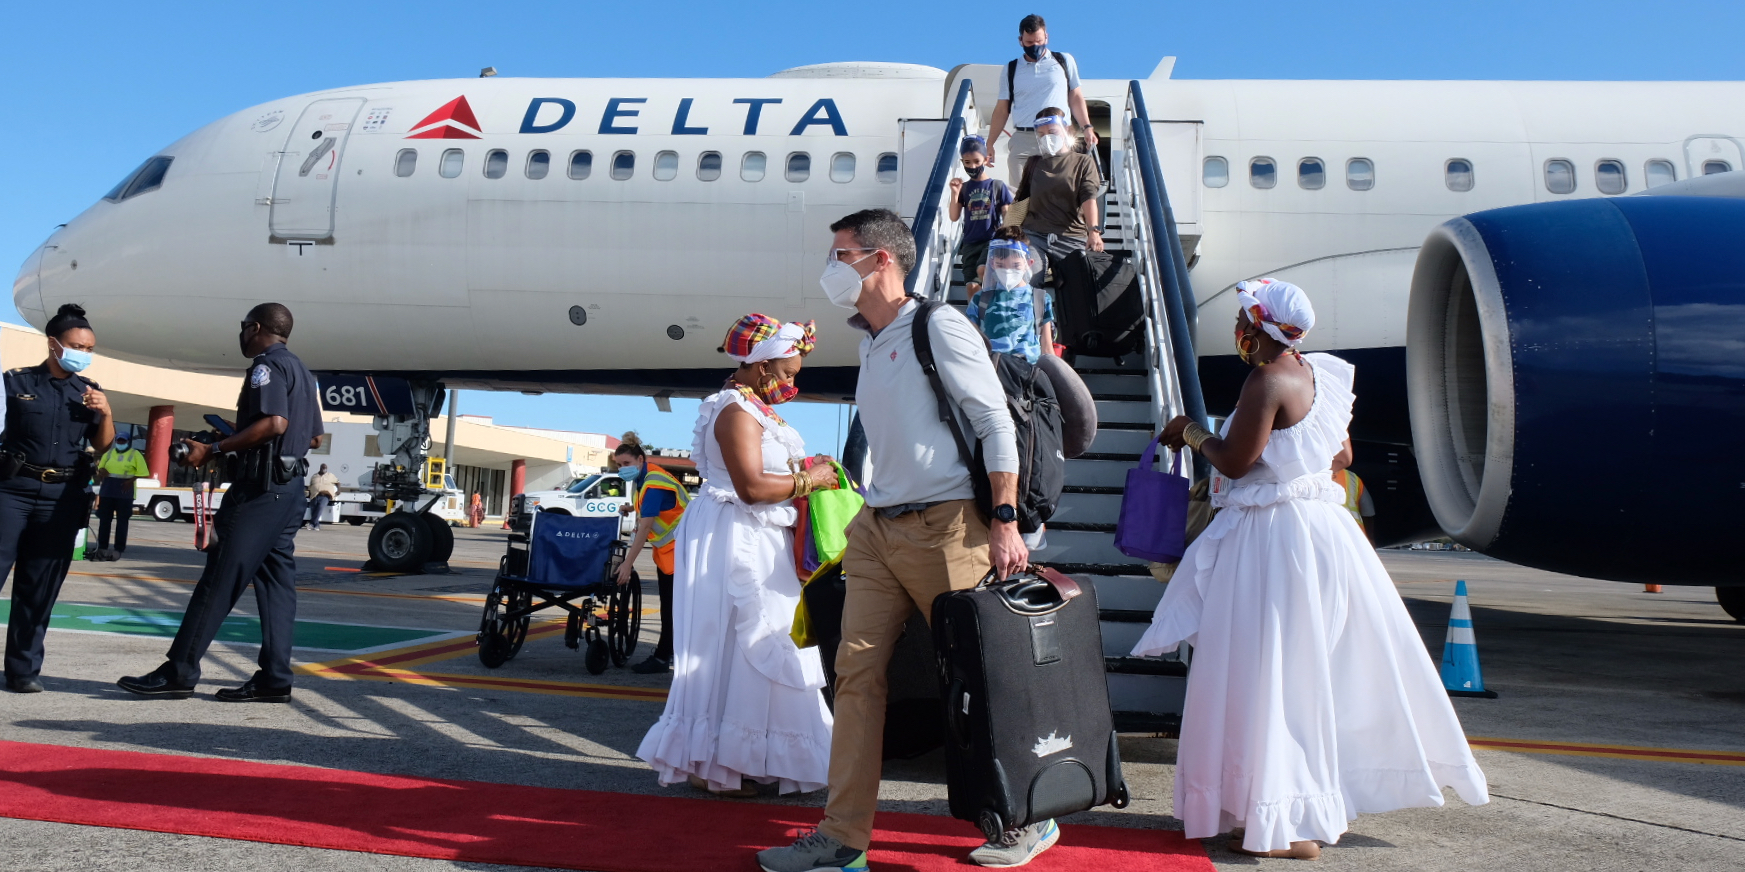 Delta Air Lines New Nonstop Service From Minneapolis To St. Thomas Began 2 Days Before Christmas